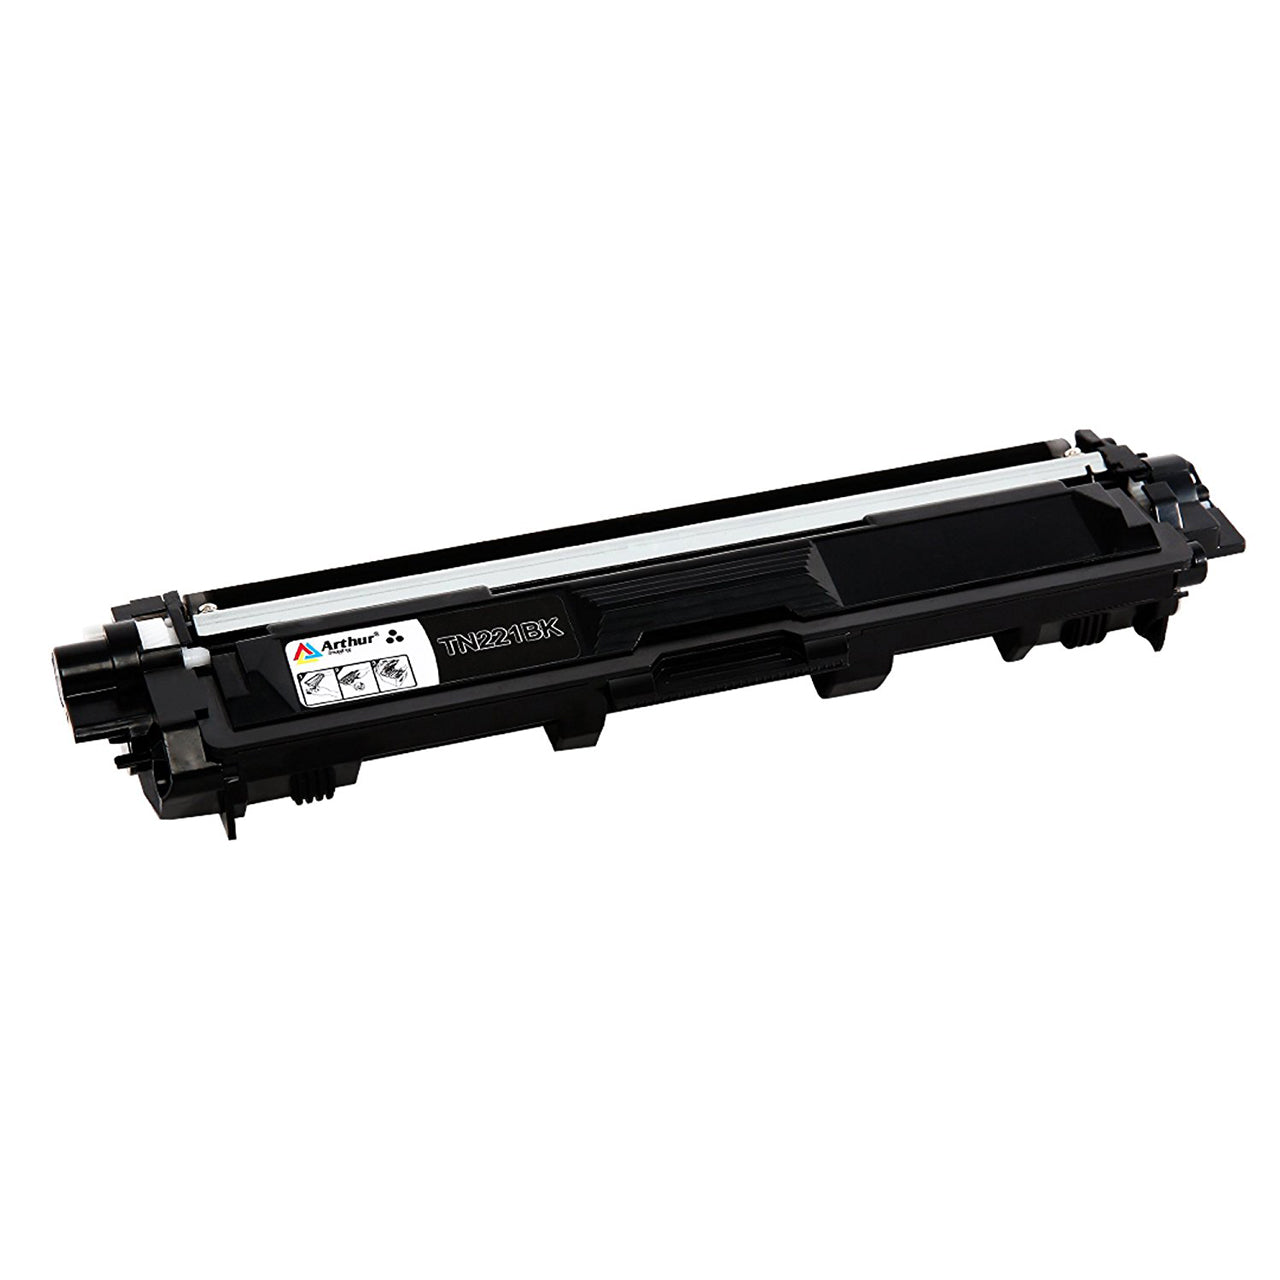 Arthur Imaging Compatible Toner Cartridge Replacement for Brother TN22